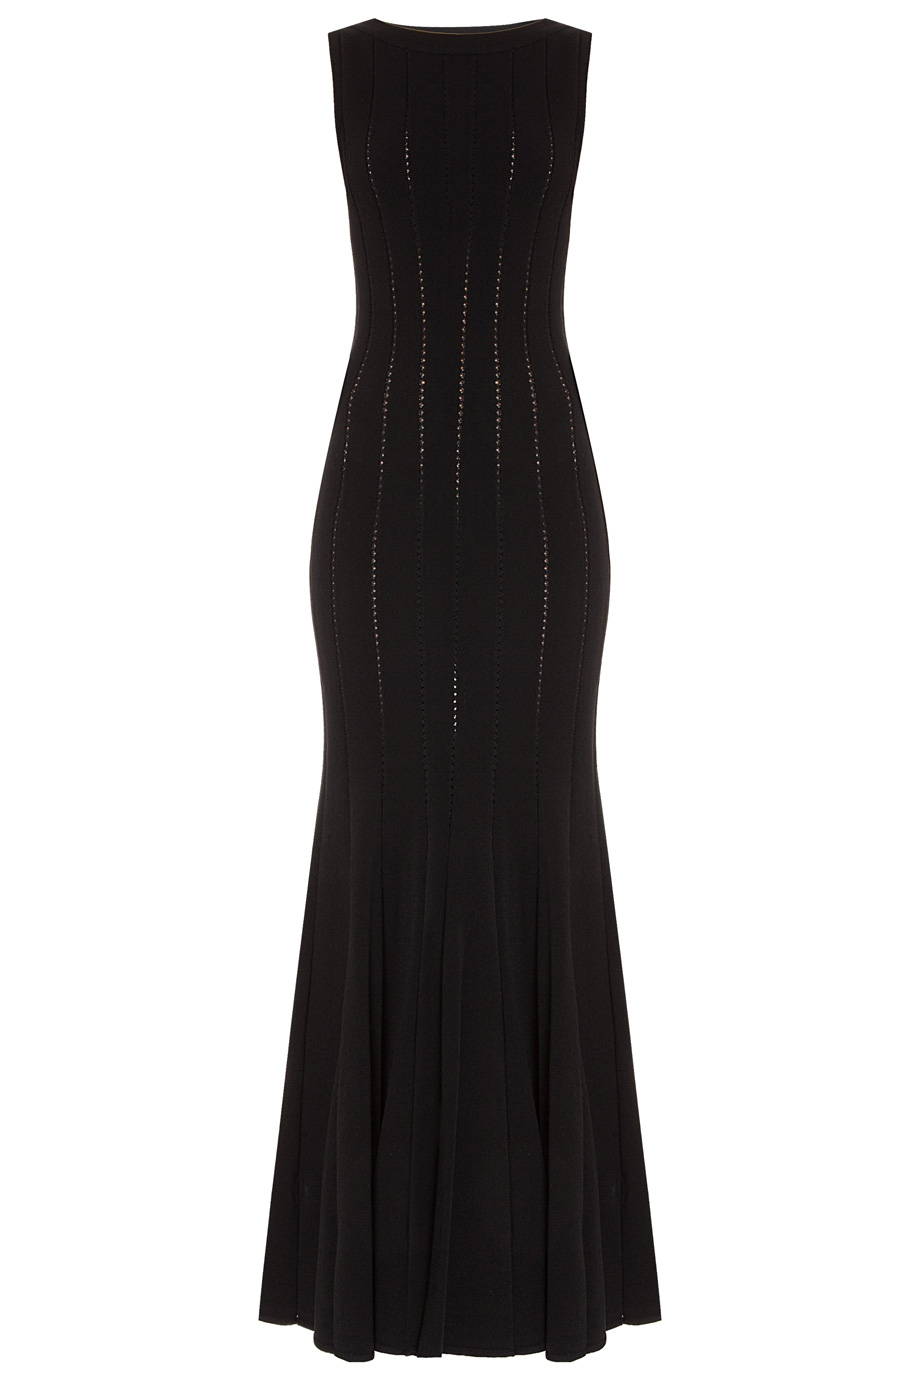 Lyst - Alaïa Gown with Holes in Black